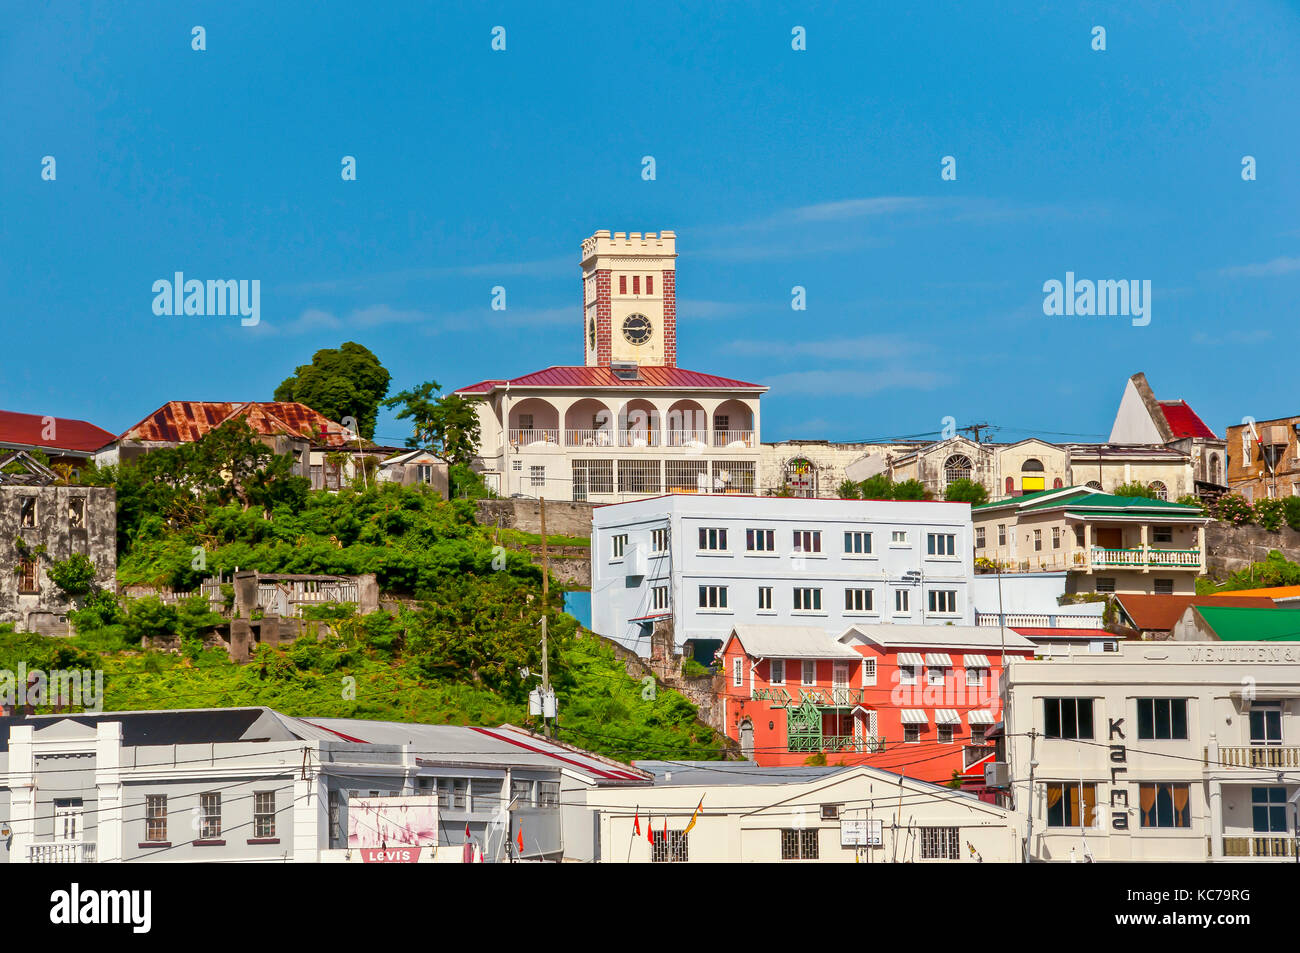 Buildings of St. George's Grenada built on the side of an old vocano, Grenada and Grenadines Stock Photo